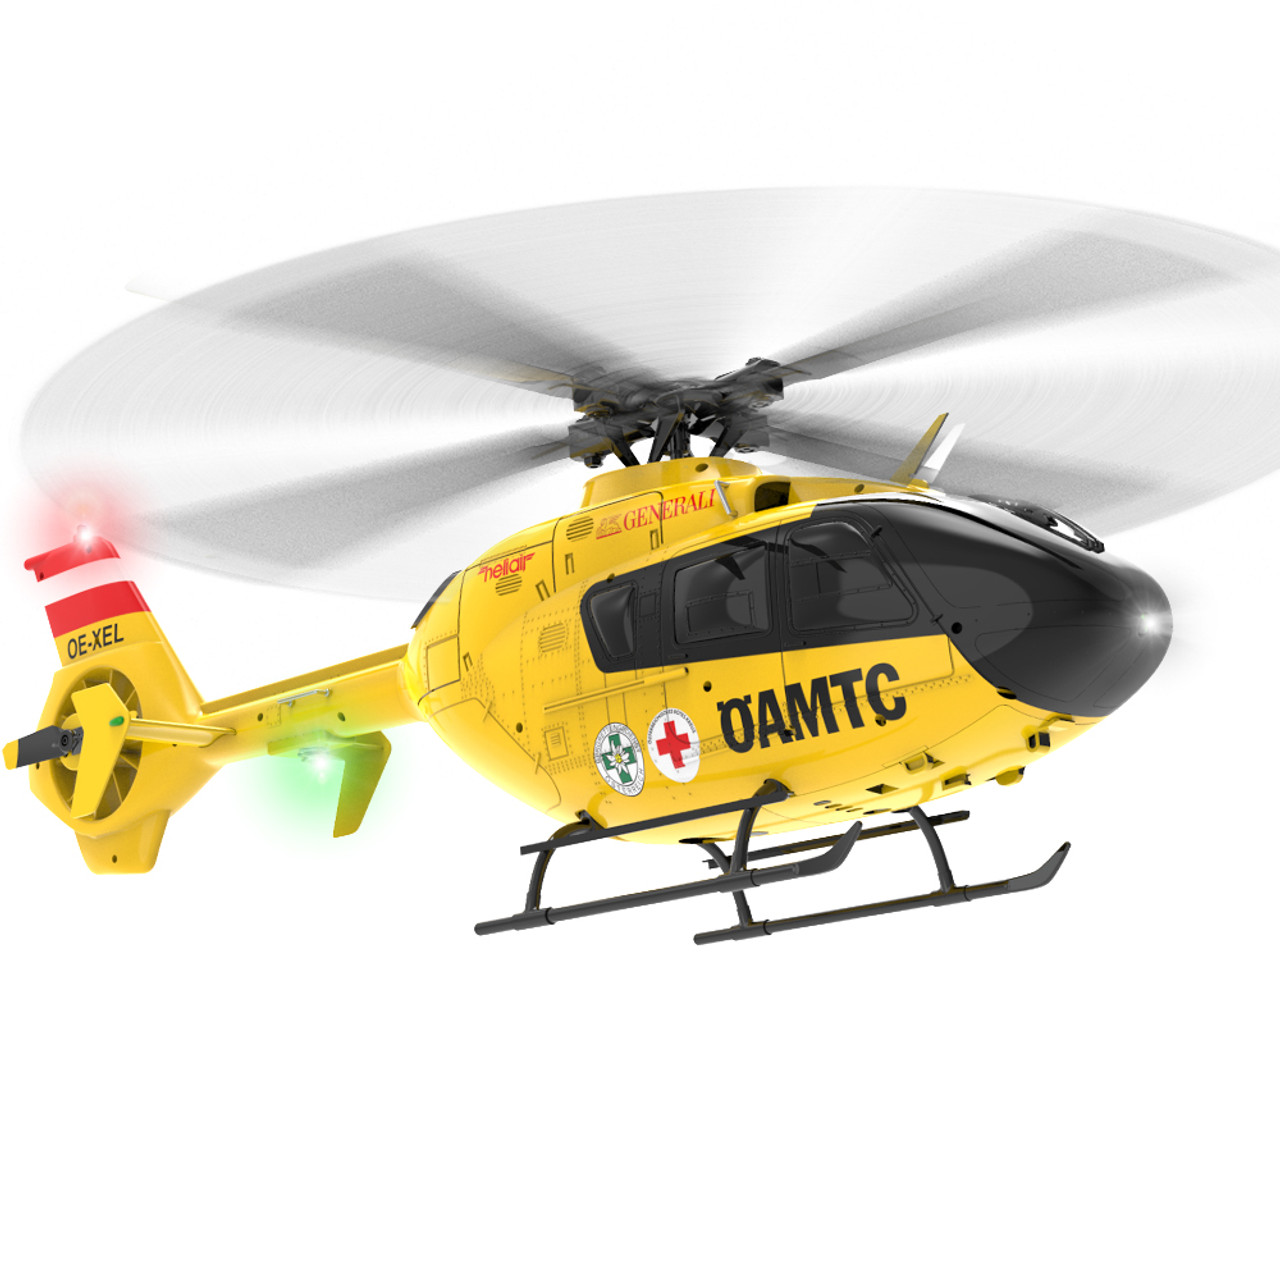 YU XIANG F06 EC135 Six-channel Flybarless Simulation Helicopter